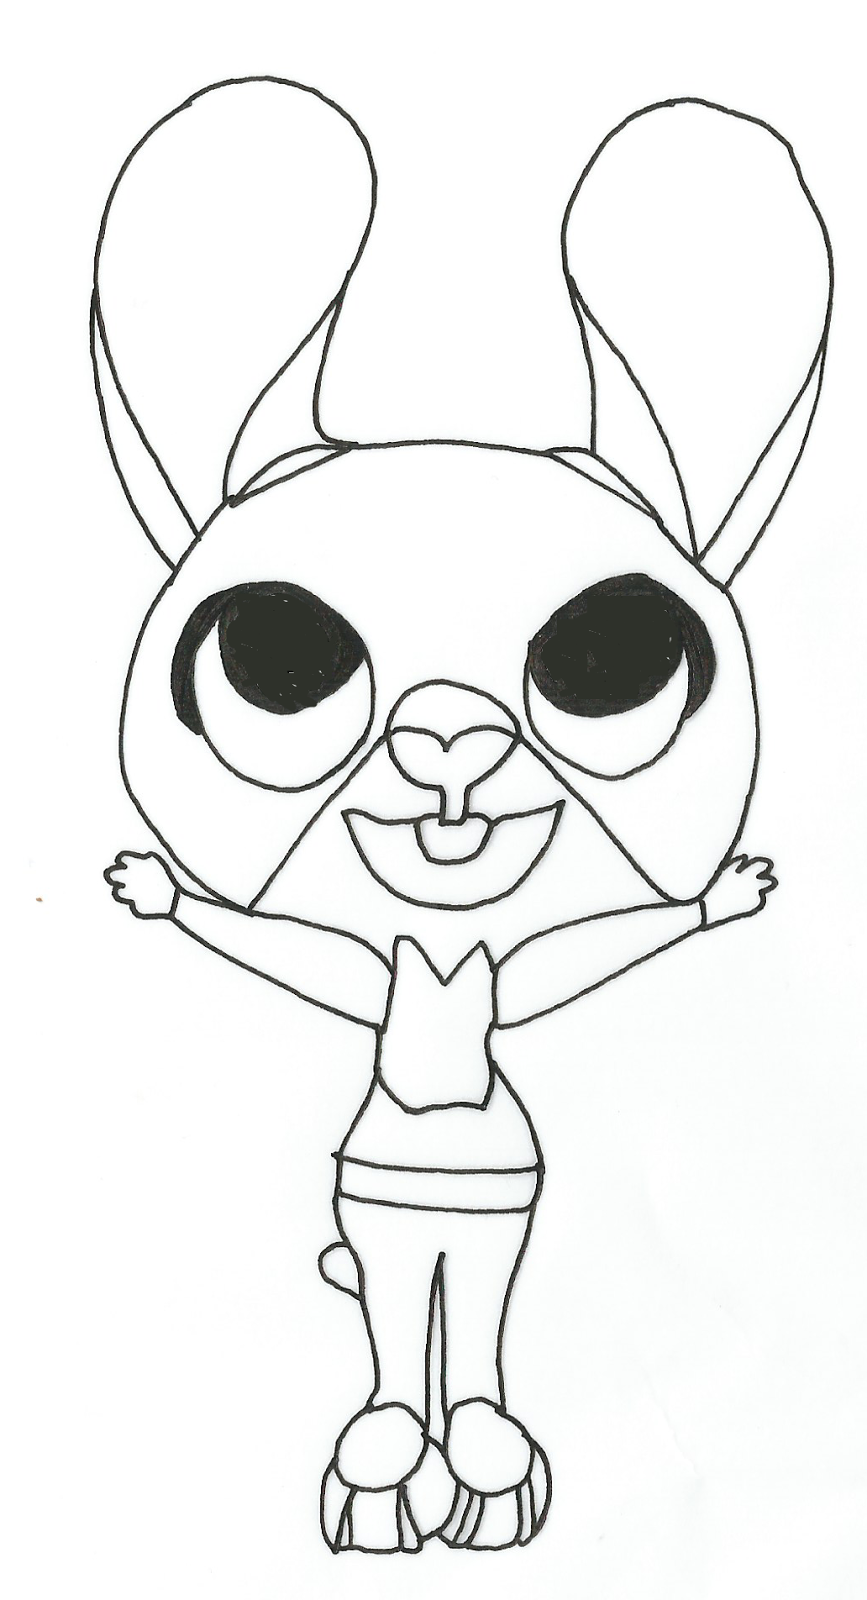 Free Printable Zootopia Coloring Pages: April 2016